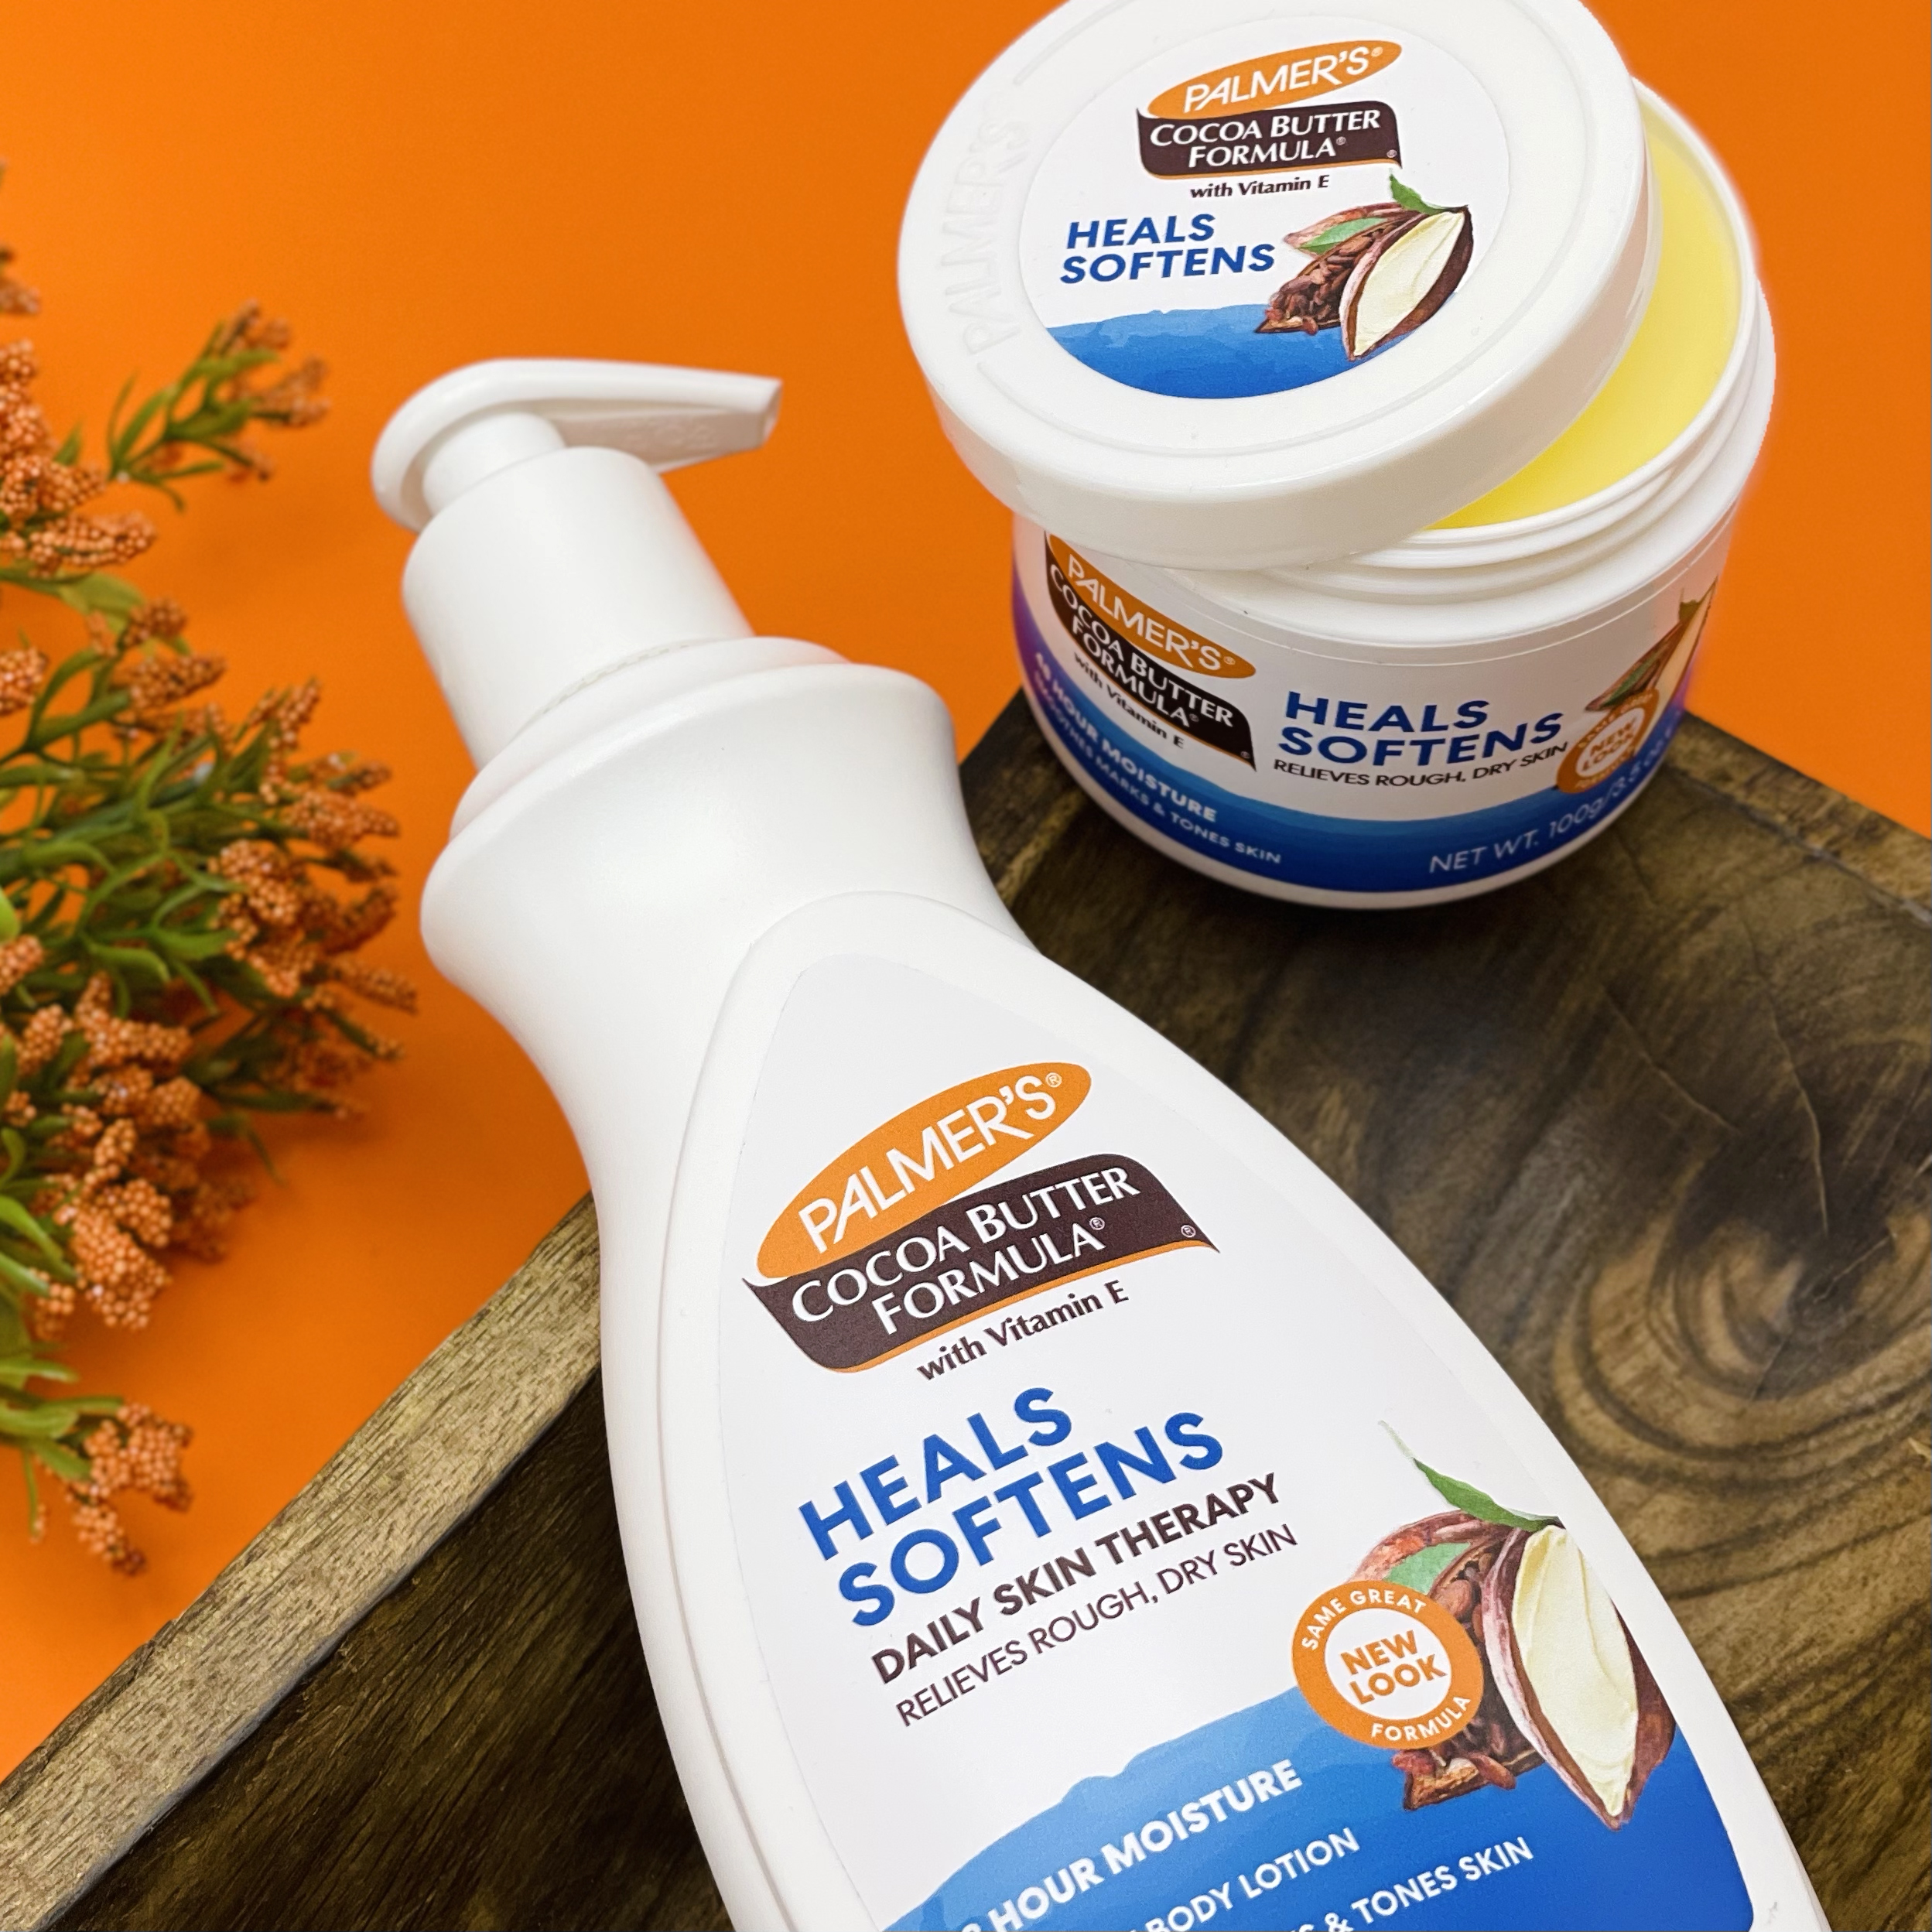 Palmer's Cocoa Butter Lotion and Original Solid Jar, the perfect additions to your winter skincare routine, on a table